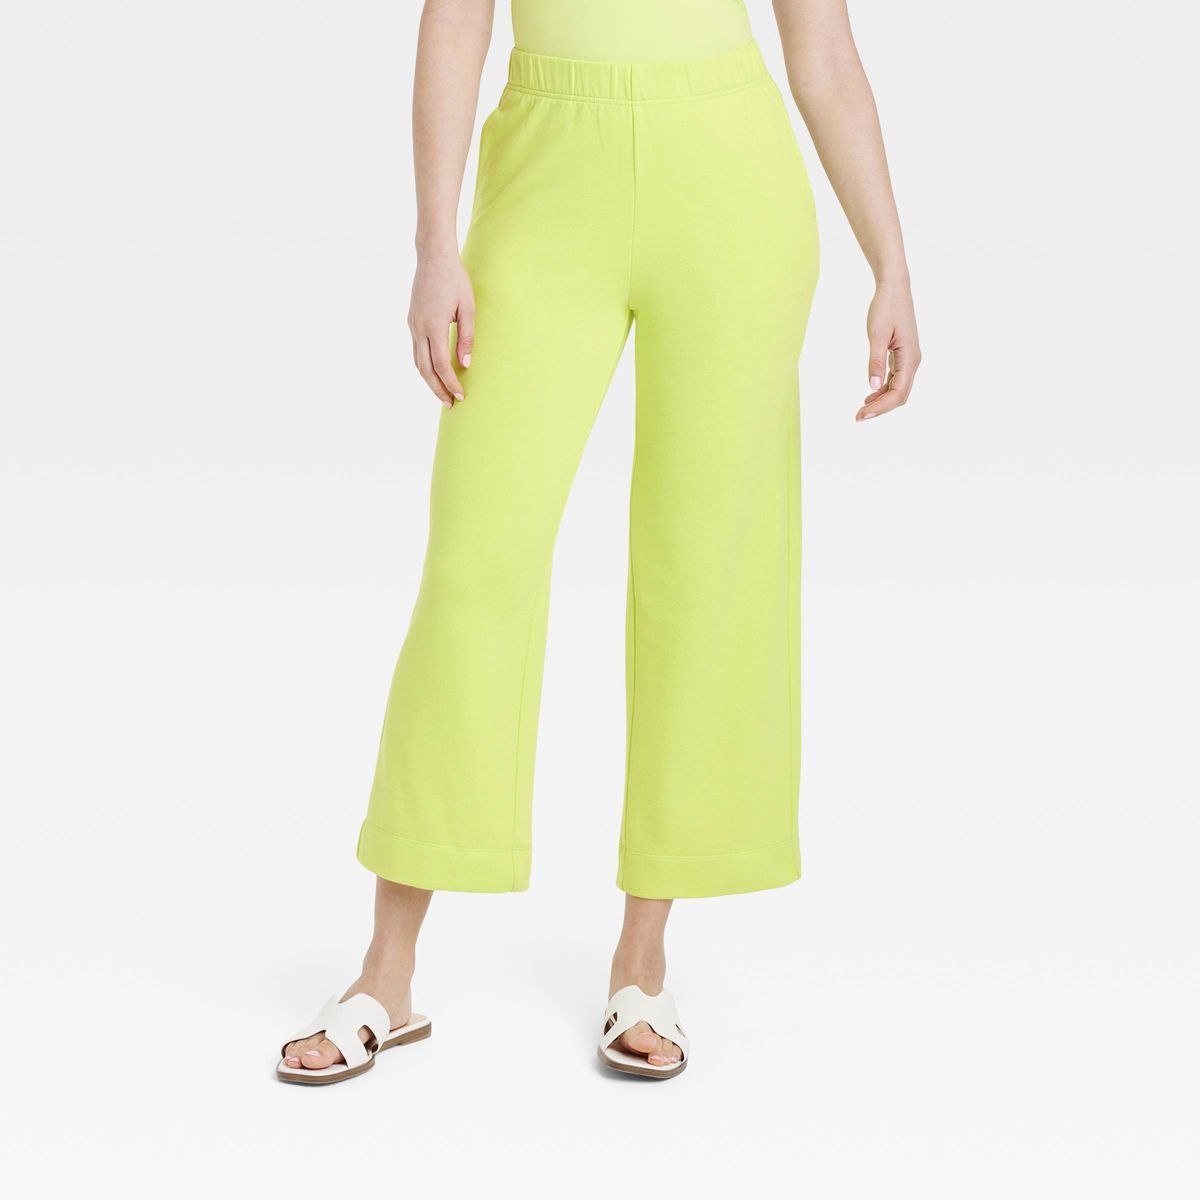 Women's High-Rise Cropped Wide Leg Sweatpants - A New Day™ Yellow M | Target